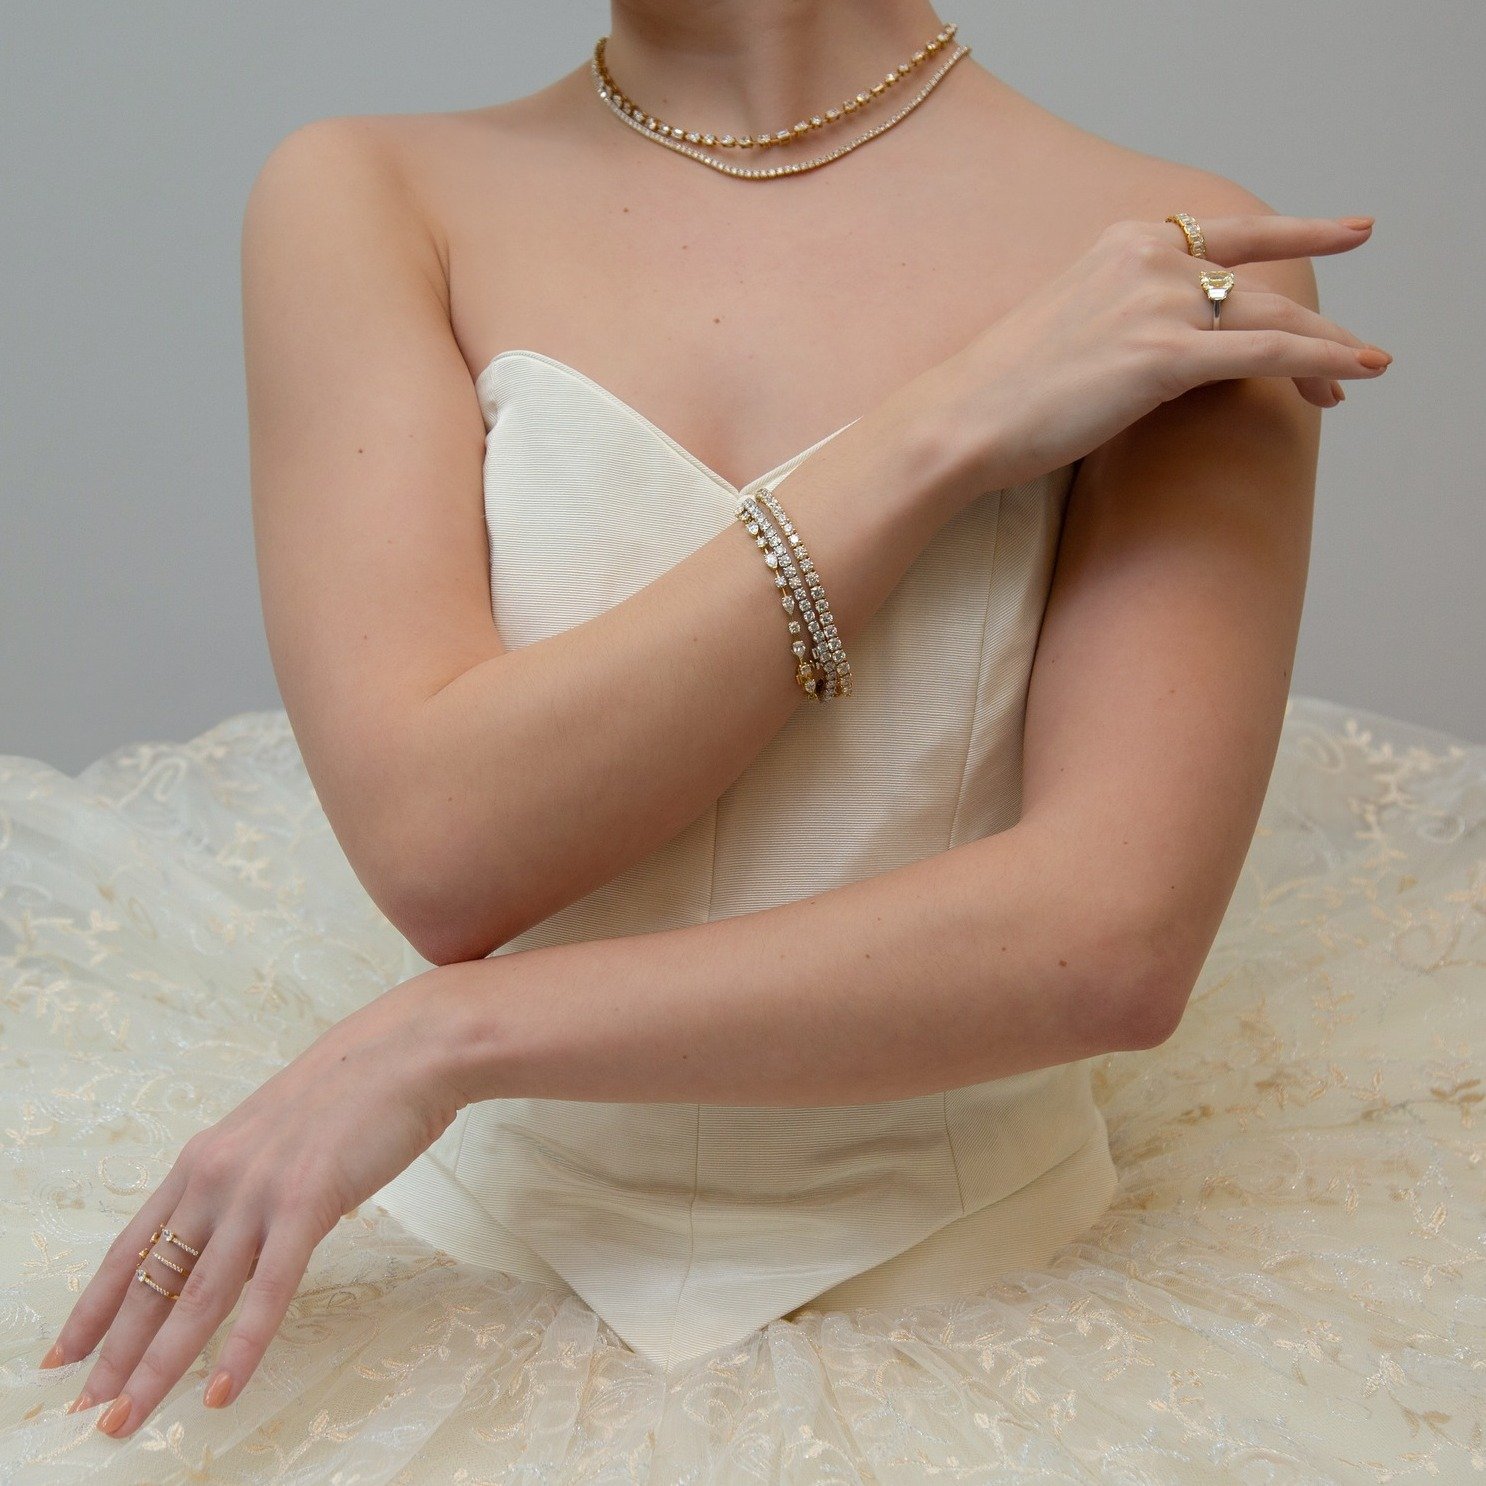 George Balanchine's Jewels ballet is showing through May 19th with @kc.ballet at the @kauffmancenter ! 🩰

We are proud to be the presenting sponsor and are donating jewelry. One lucky audience member will win a piece of jewelry at every performance 